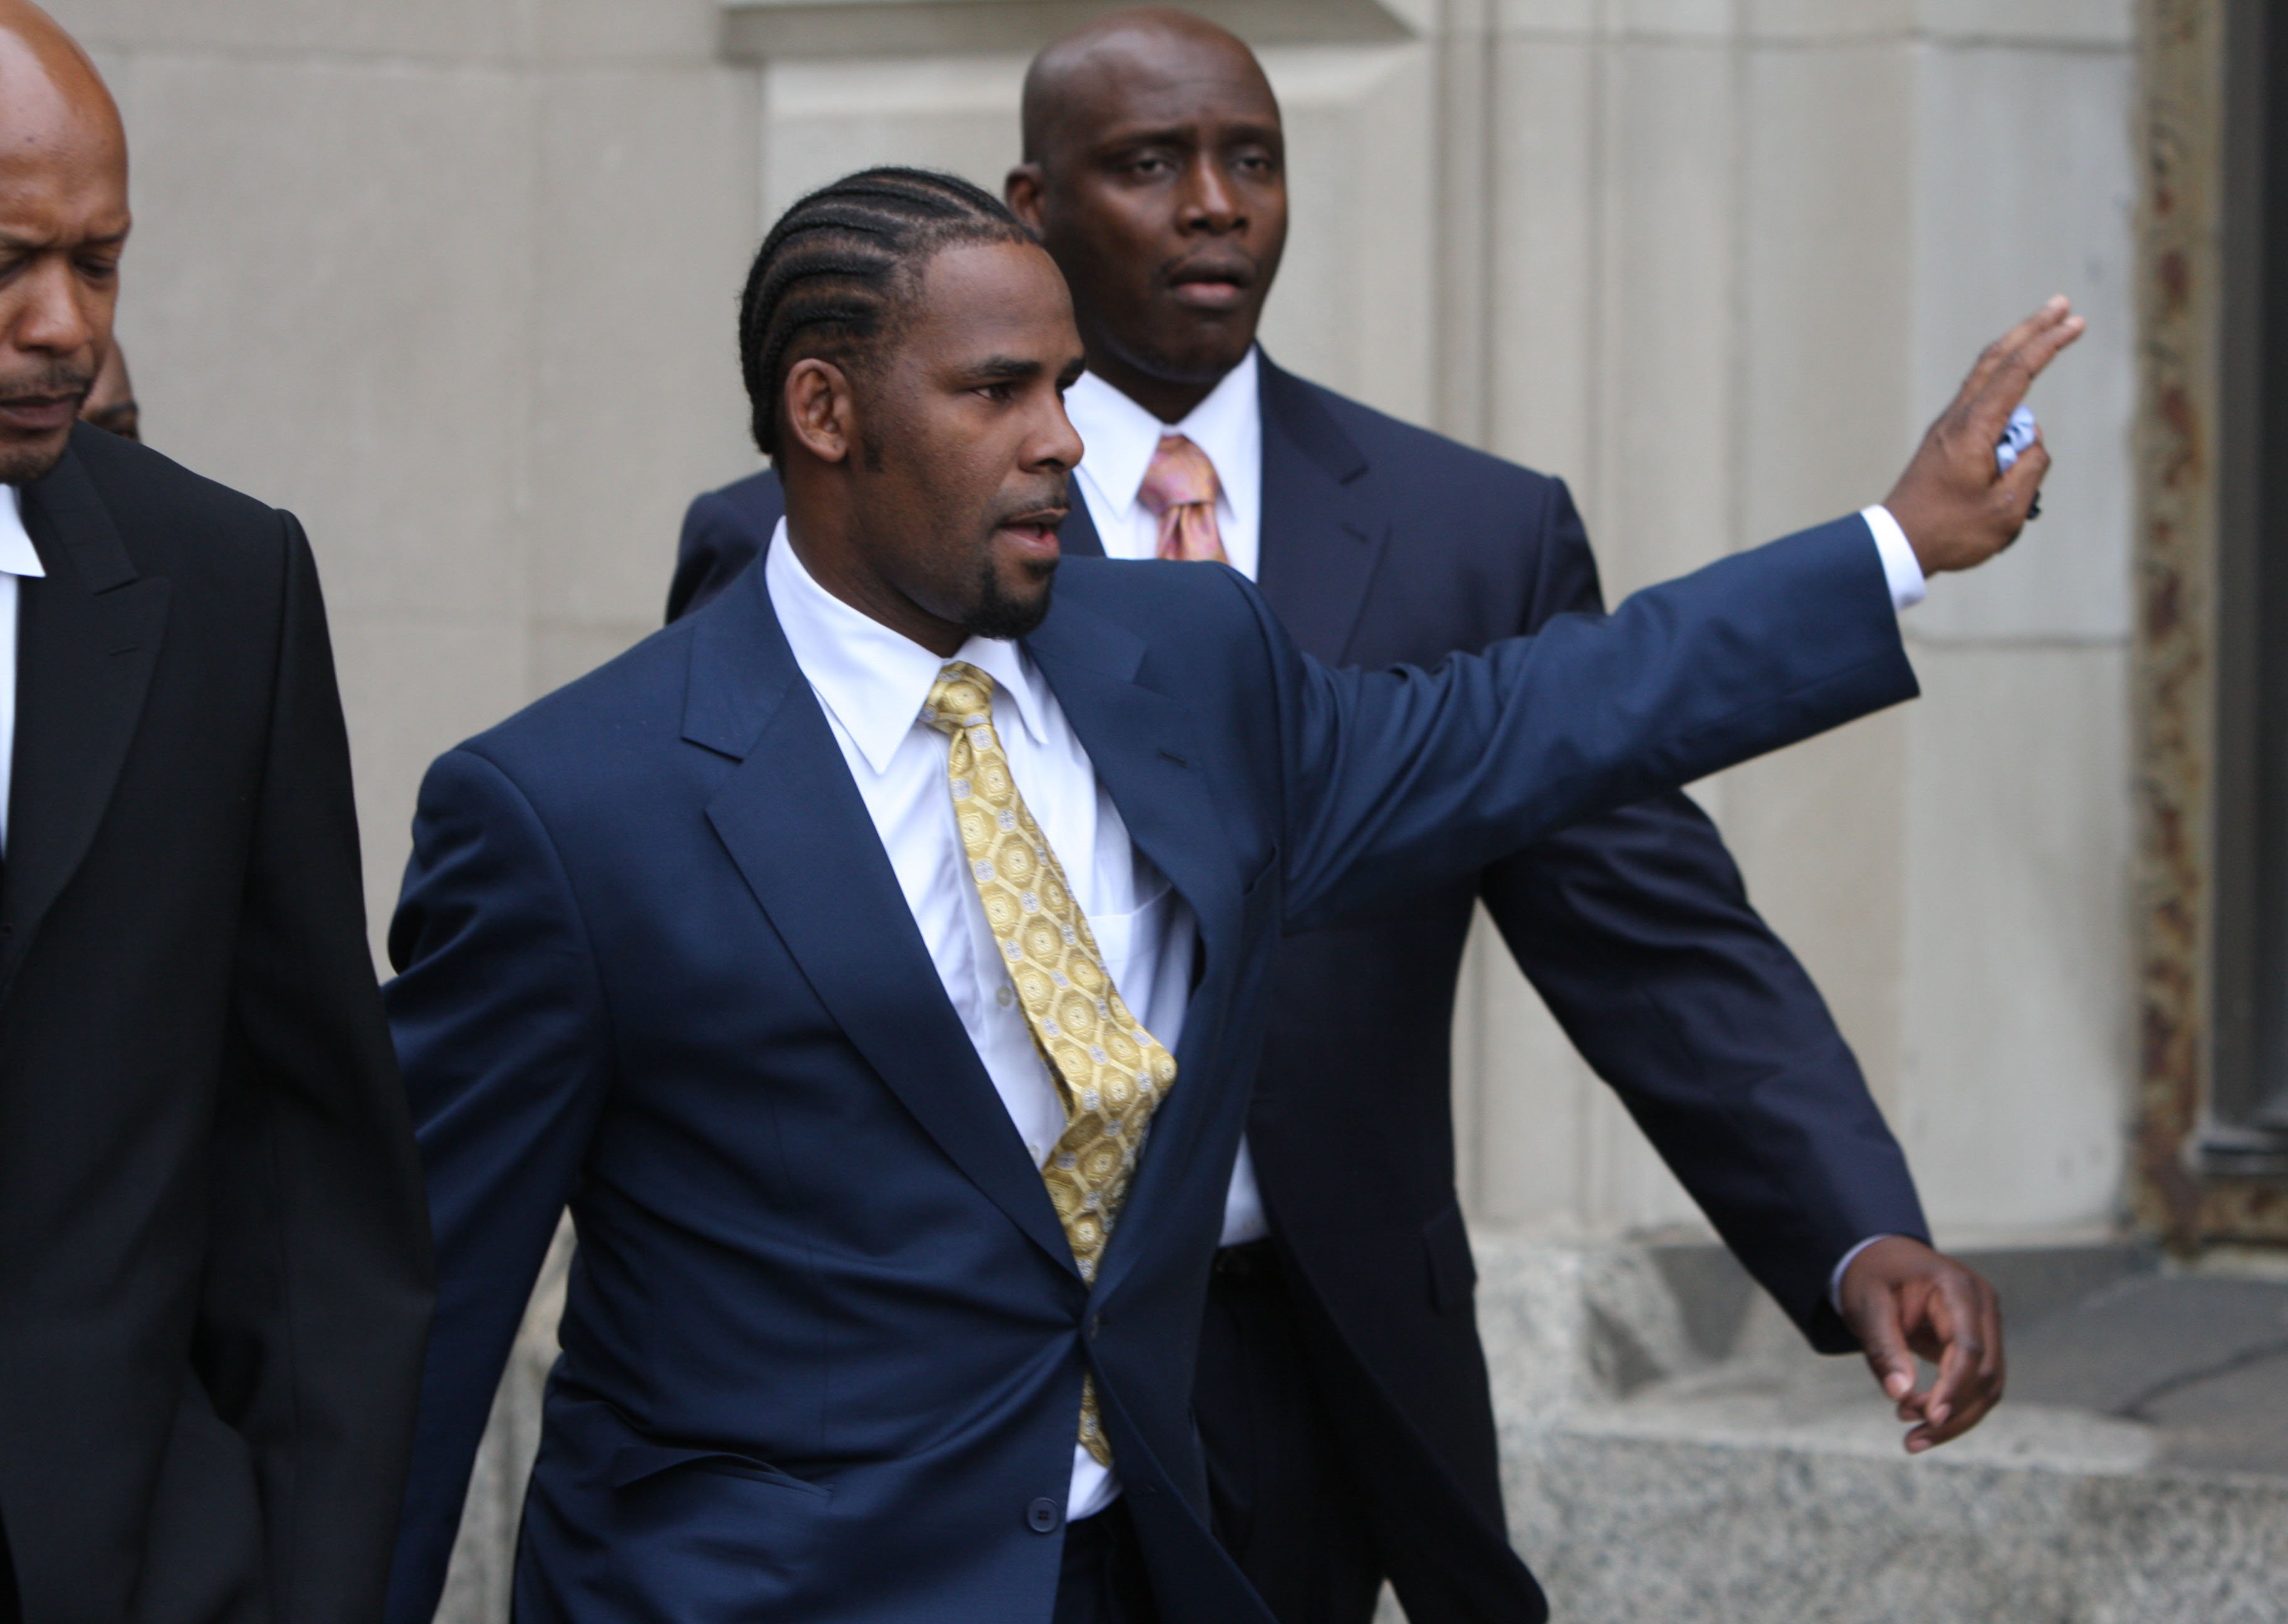 R&amp;B star R. Kelly, 41, waves to supporters as he leaves the Cook County Criminal Courts Building after he was acquitted of child pornography charges Friday, June 13, 2008, in Chicago, Illinois. (Chicago Tribune—MCT via Getty Images)